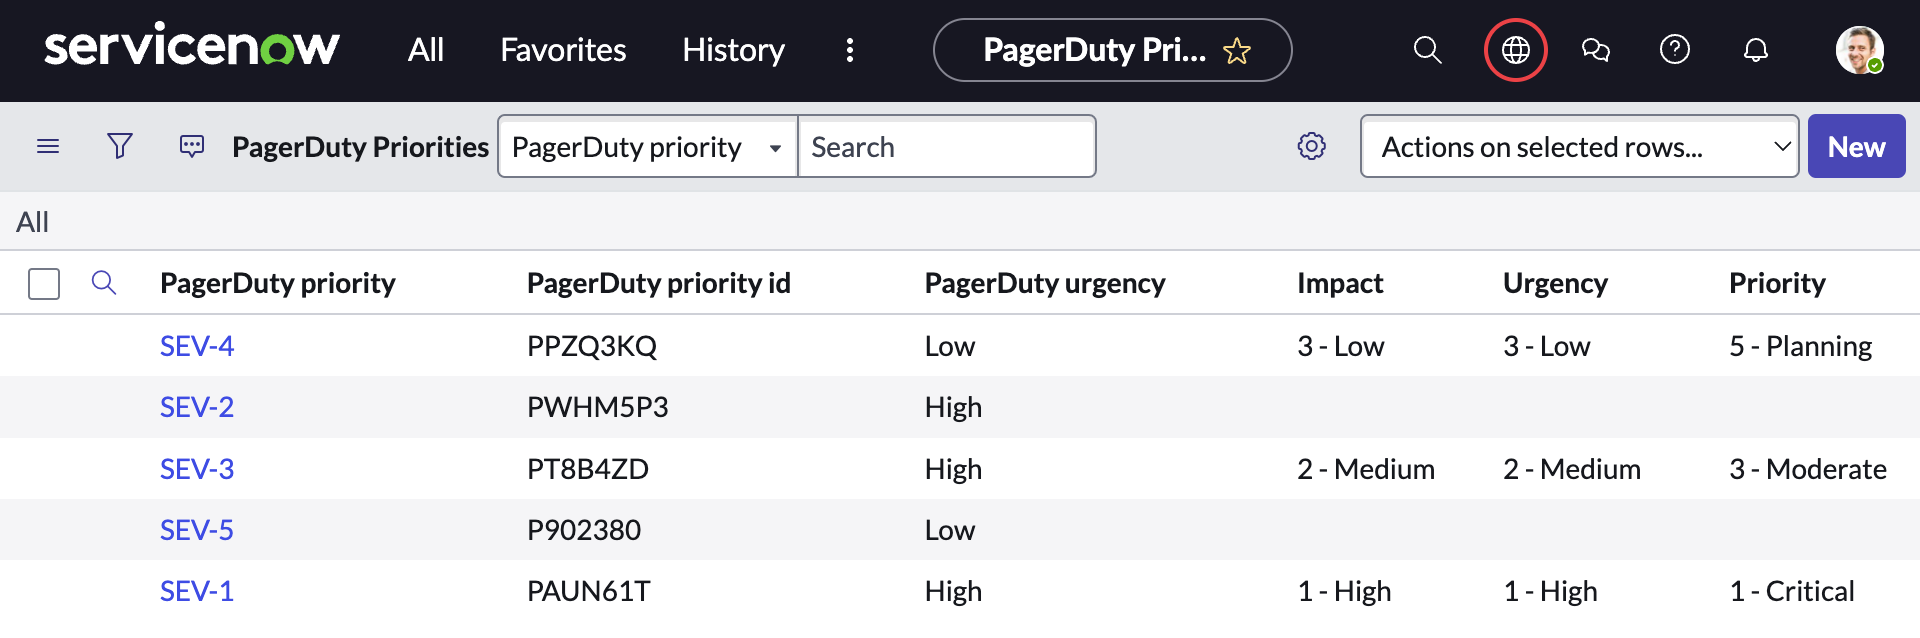 PagerDuty Priorities table in ServiceNow with mapped priorities